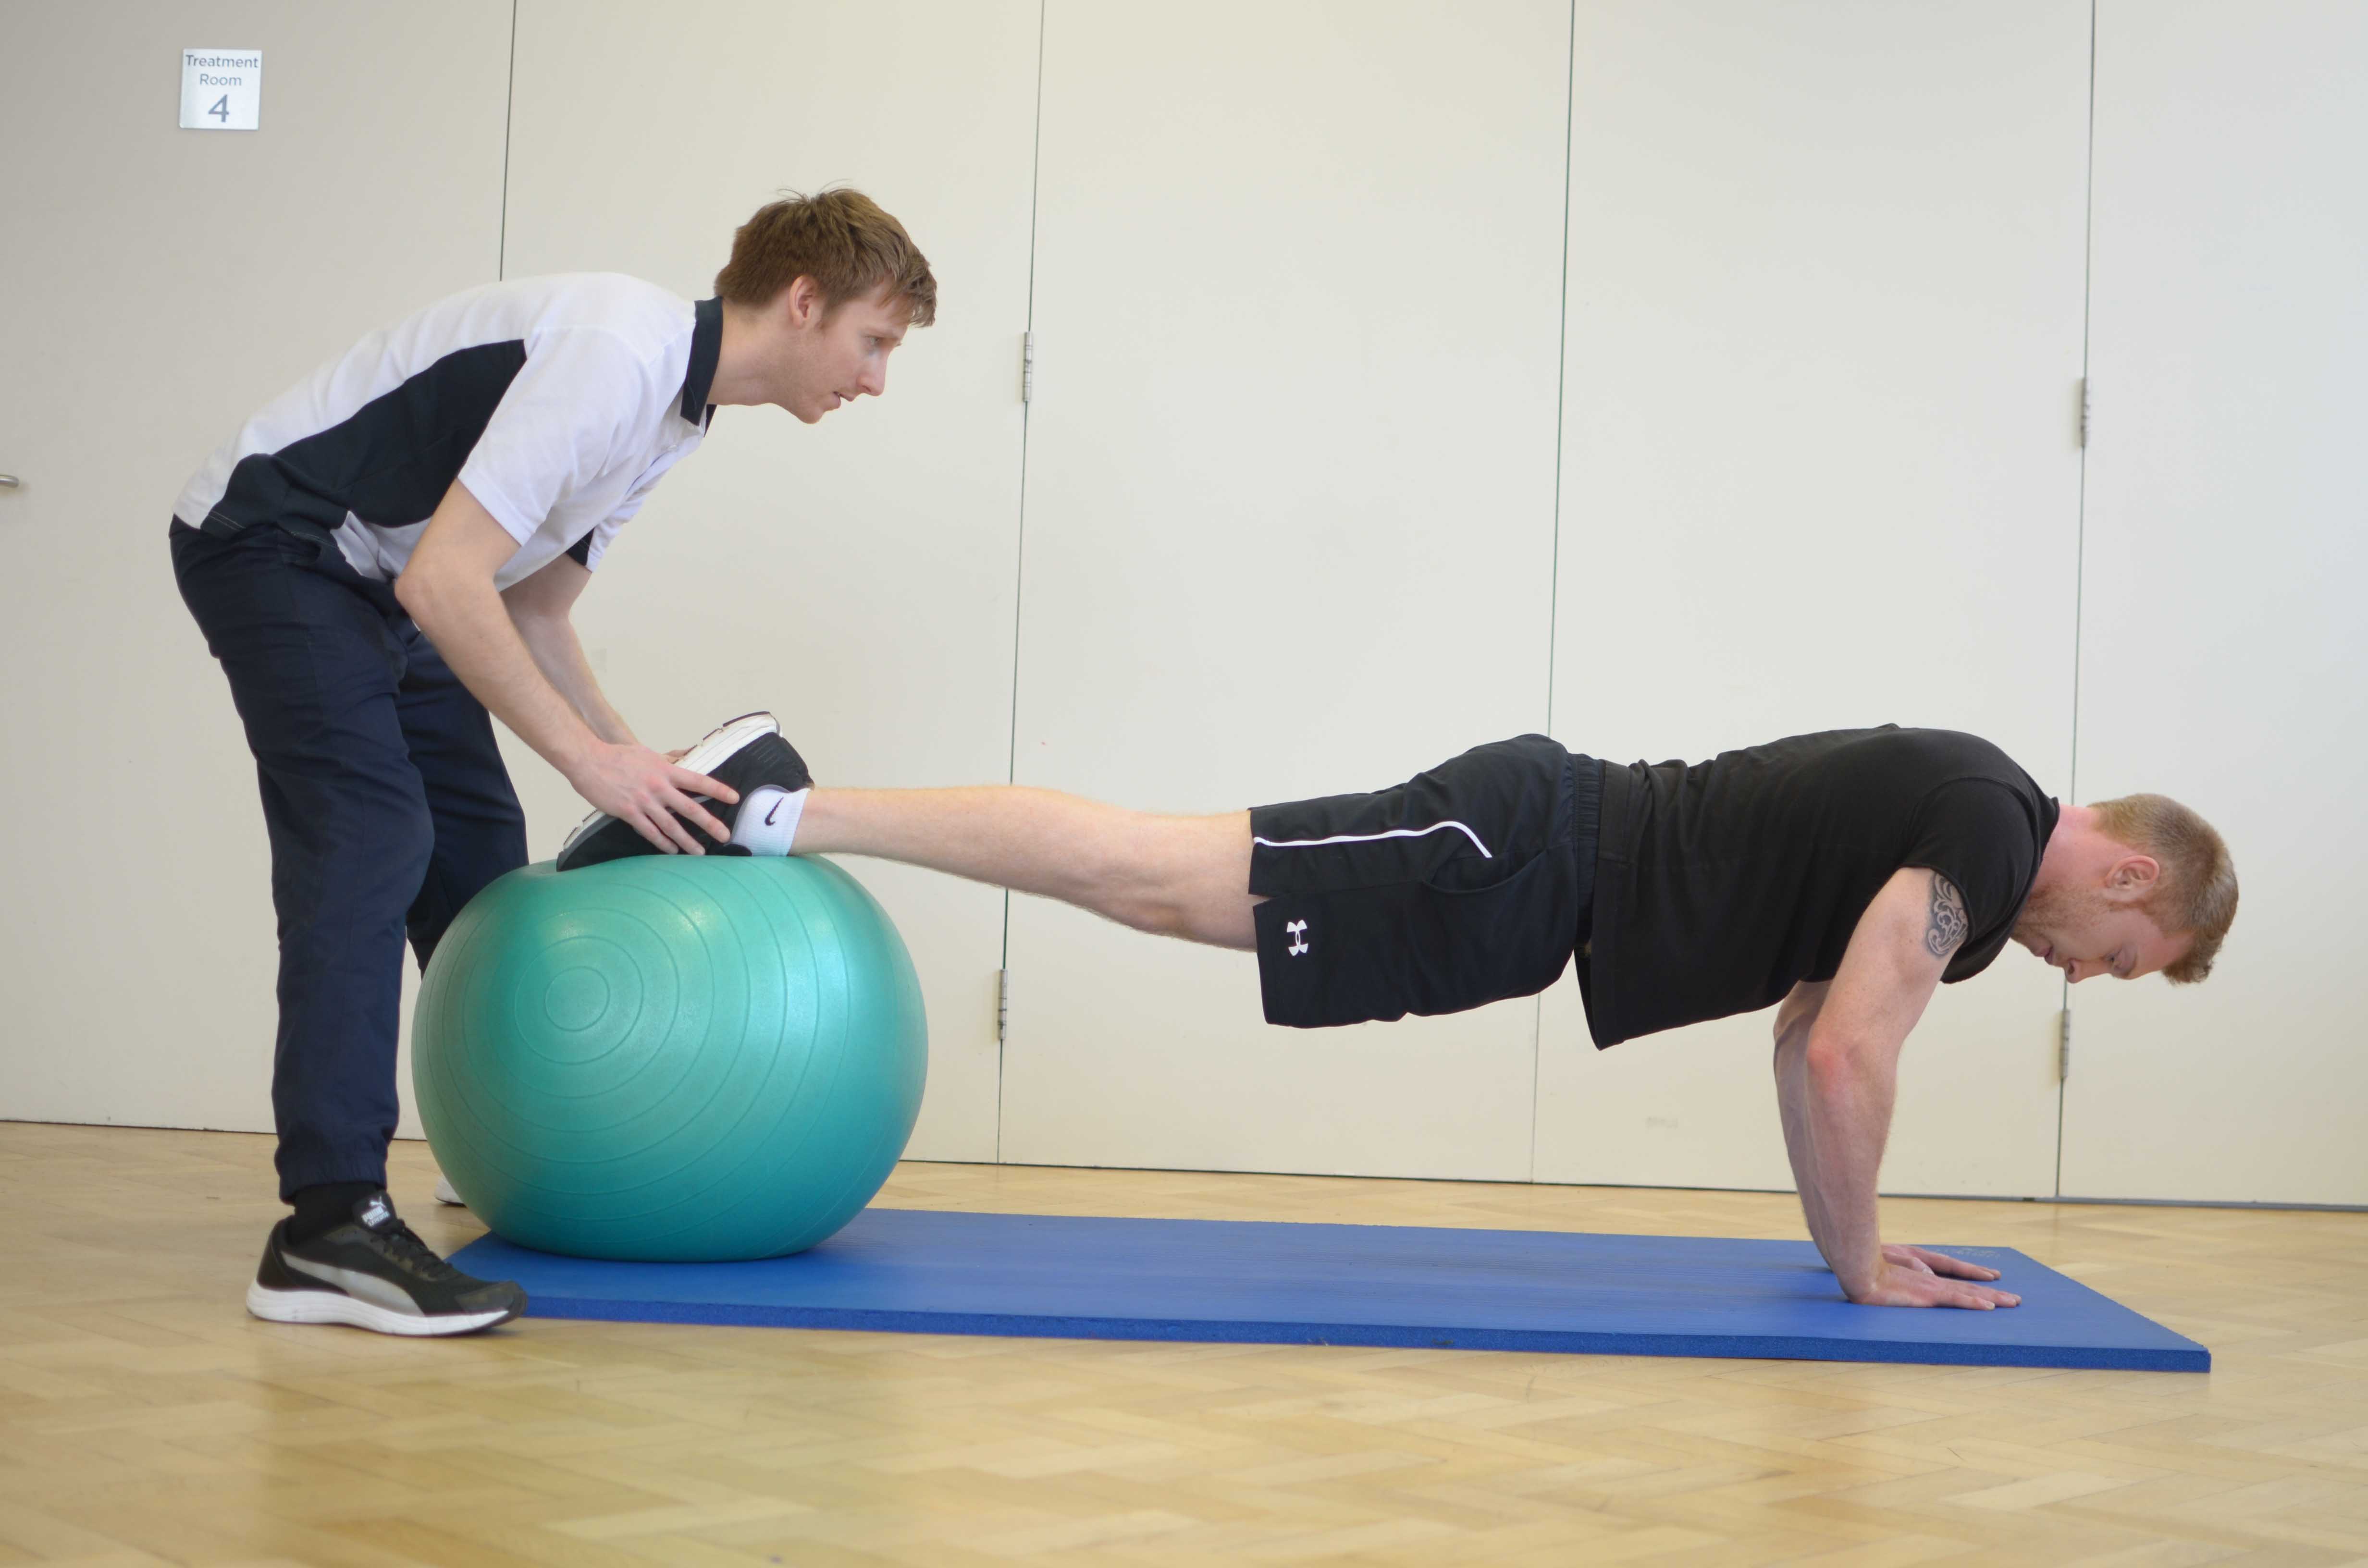 Strengthening exercises for the chest muscles supervised by MSK Physiotherapist